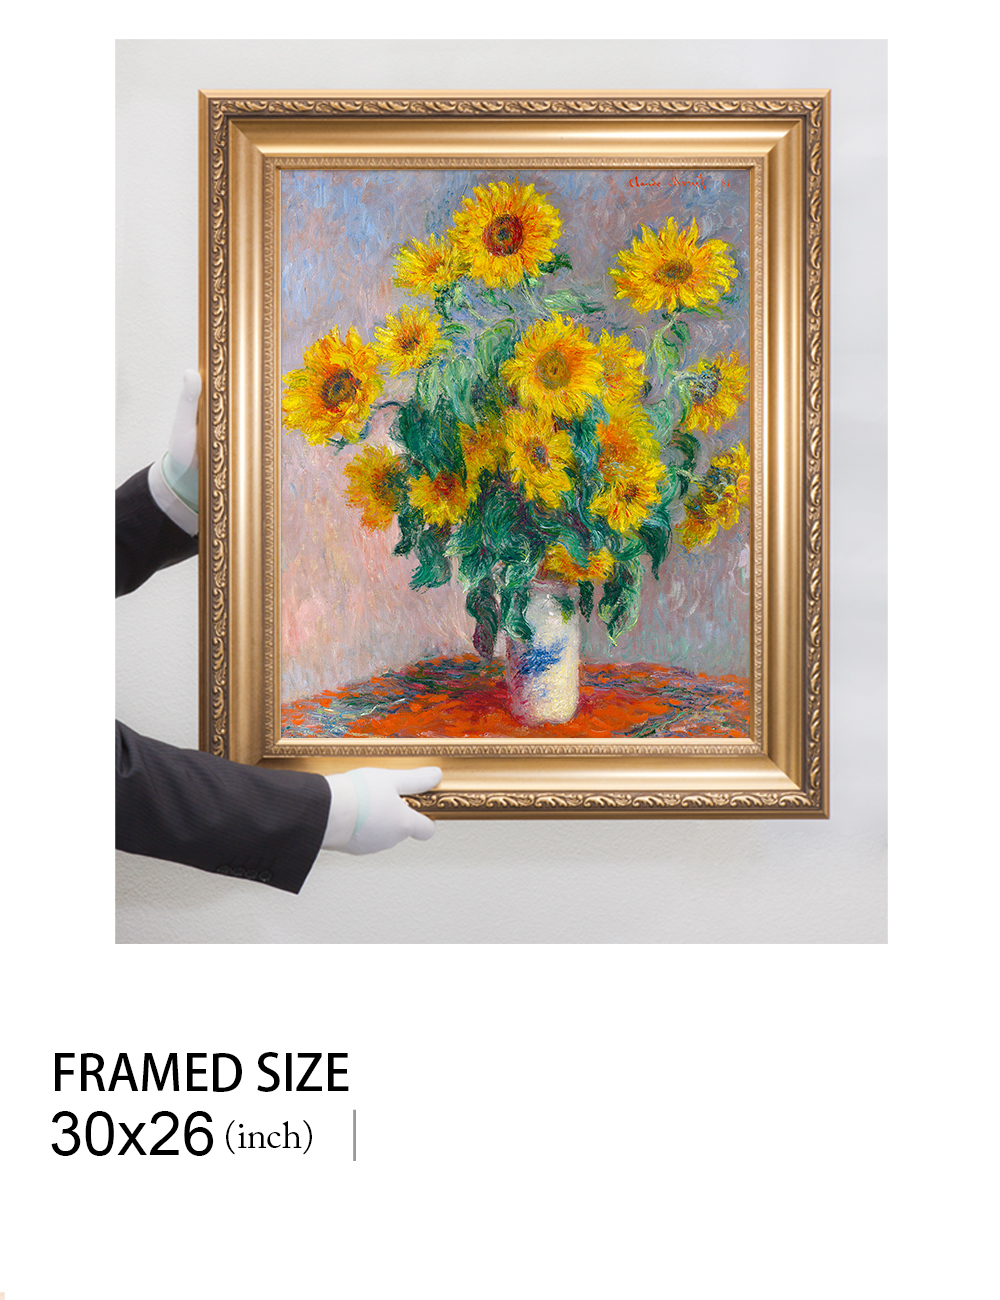 DECORARTS Sunflowers by Claude Monet. Classic Art Reproduction, Giclee  Print on Canvas. Ready to Hang Framed Wall Art for Wall Decor. Total Size  w/ Frame: 26x30